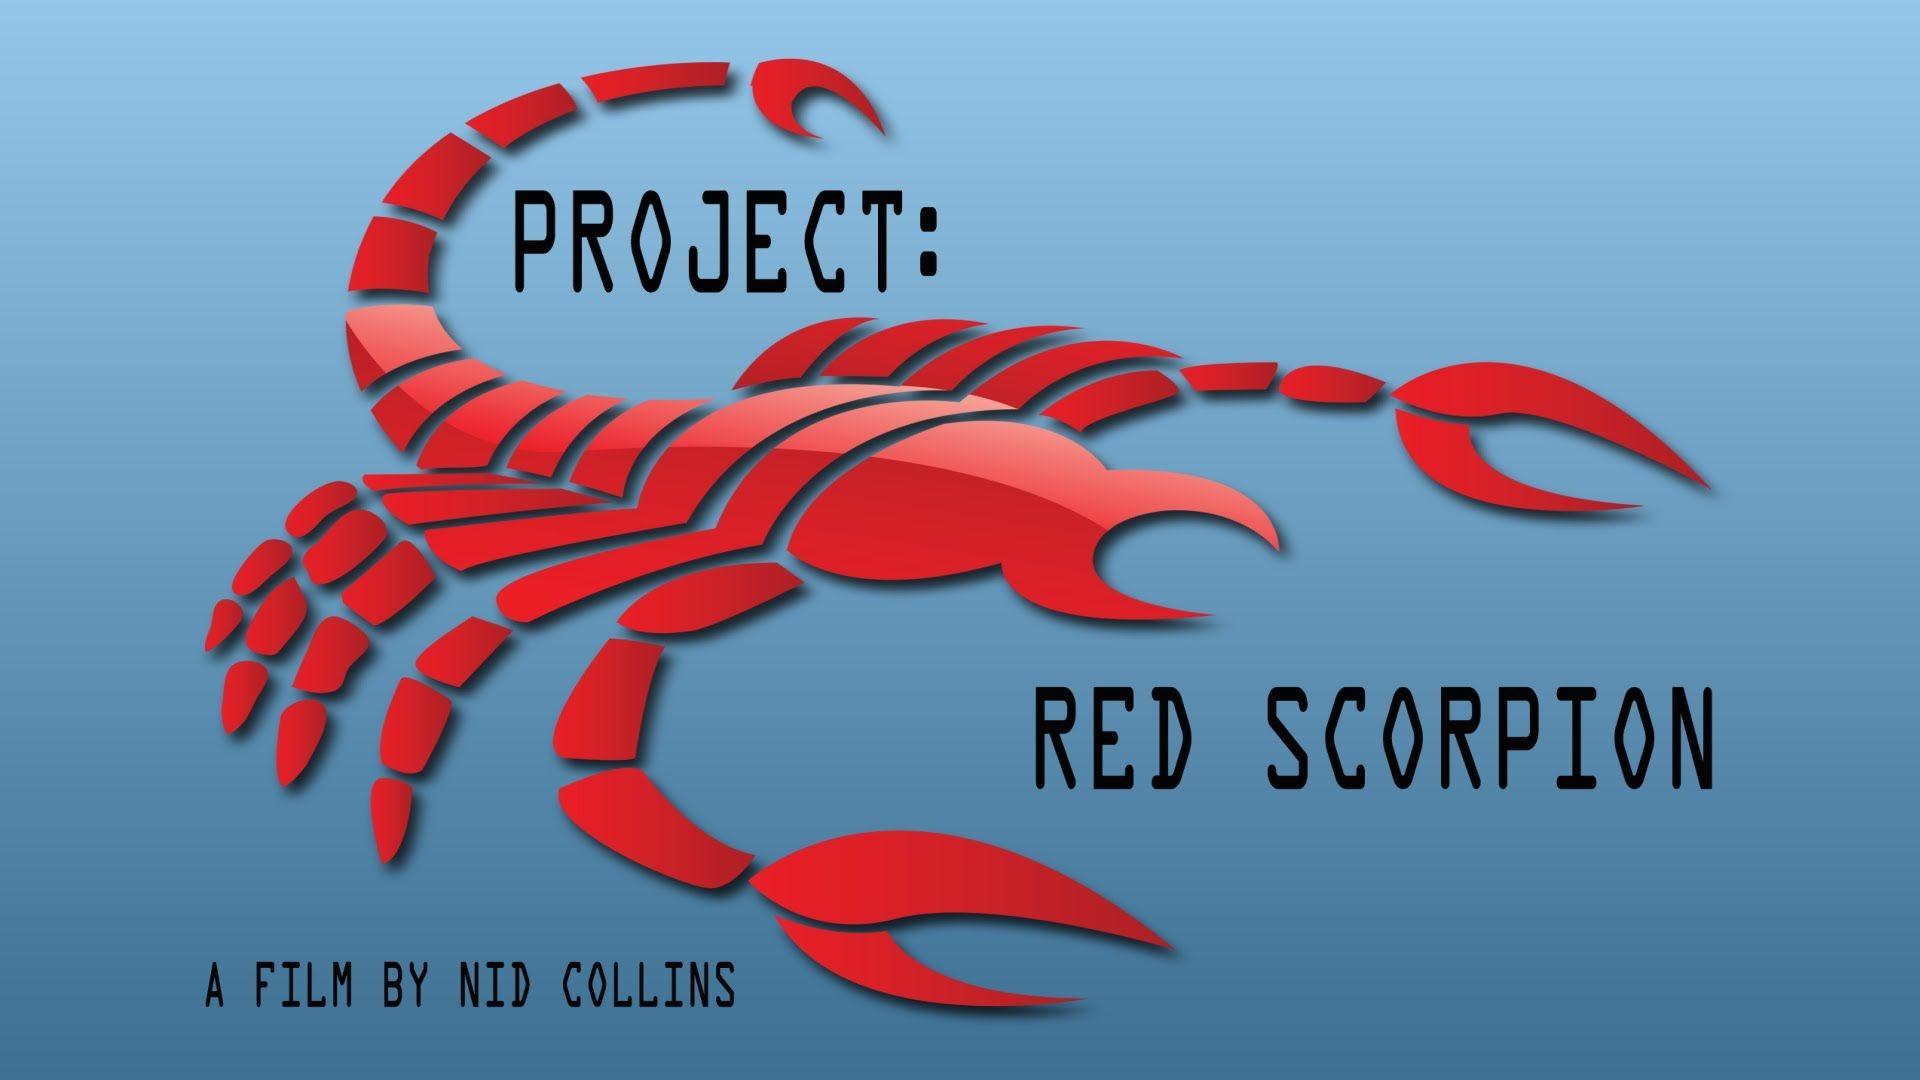 Project: Red Scorpion film